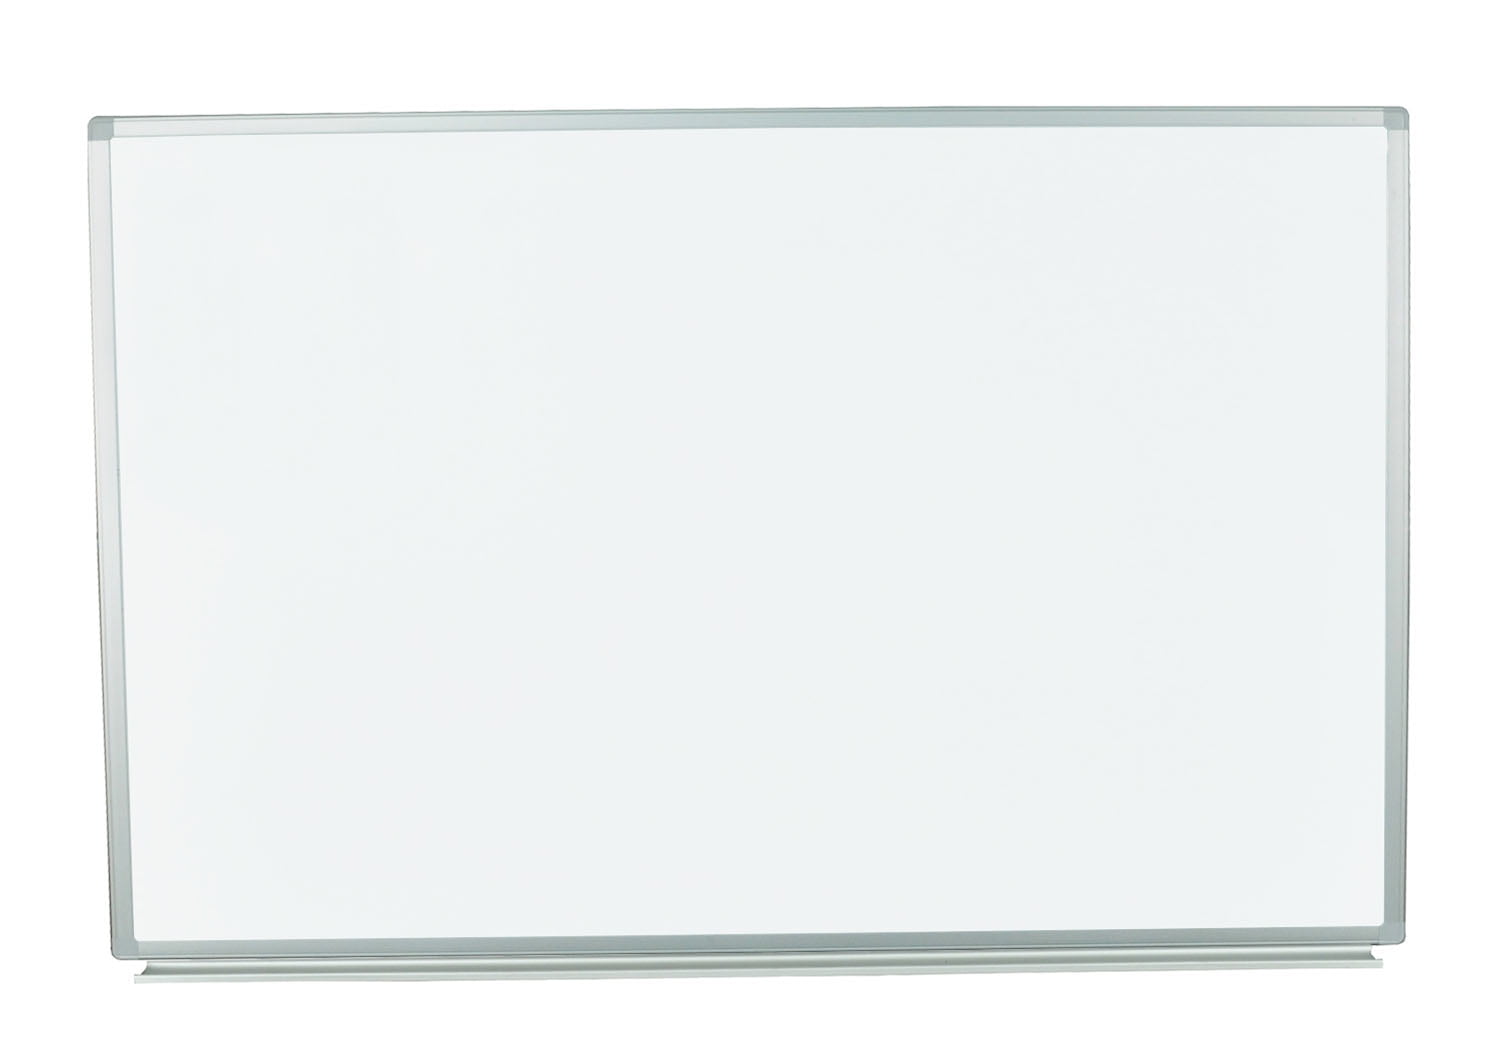 Universal 43624 48 x 36 inch Dry Erase Board White for sale online 